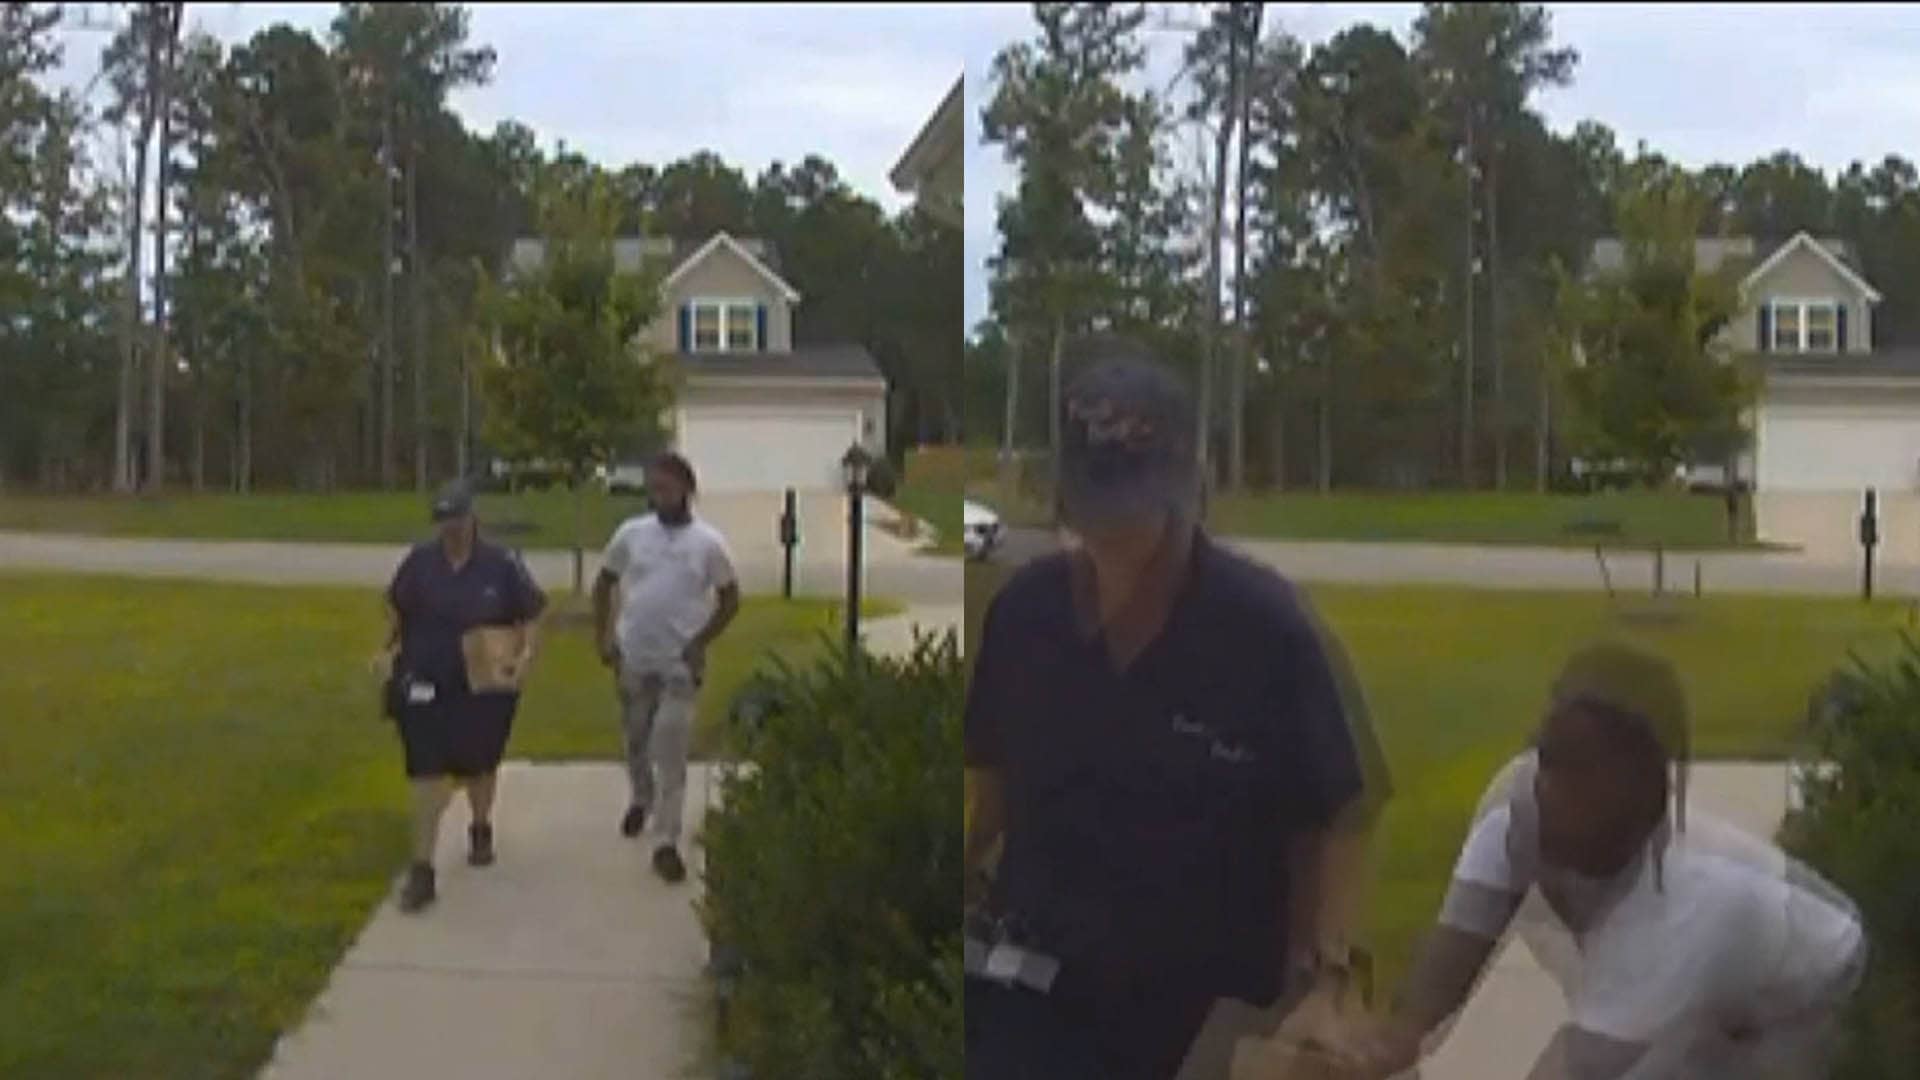 A news article discussing a brazen package theft from a FedEx driver in Chesterfield, VA.